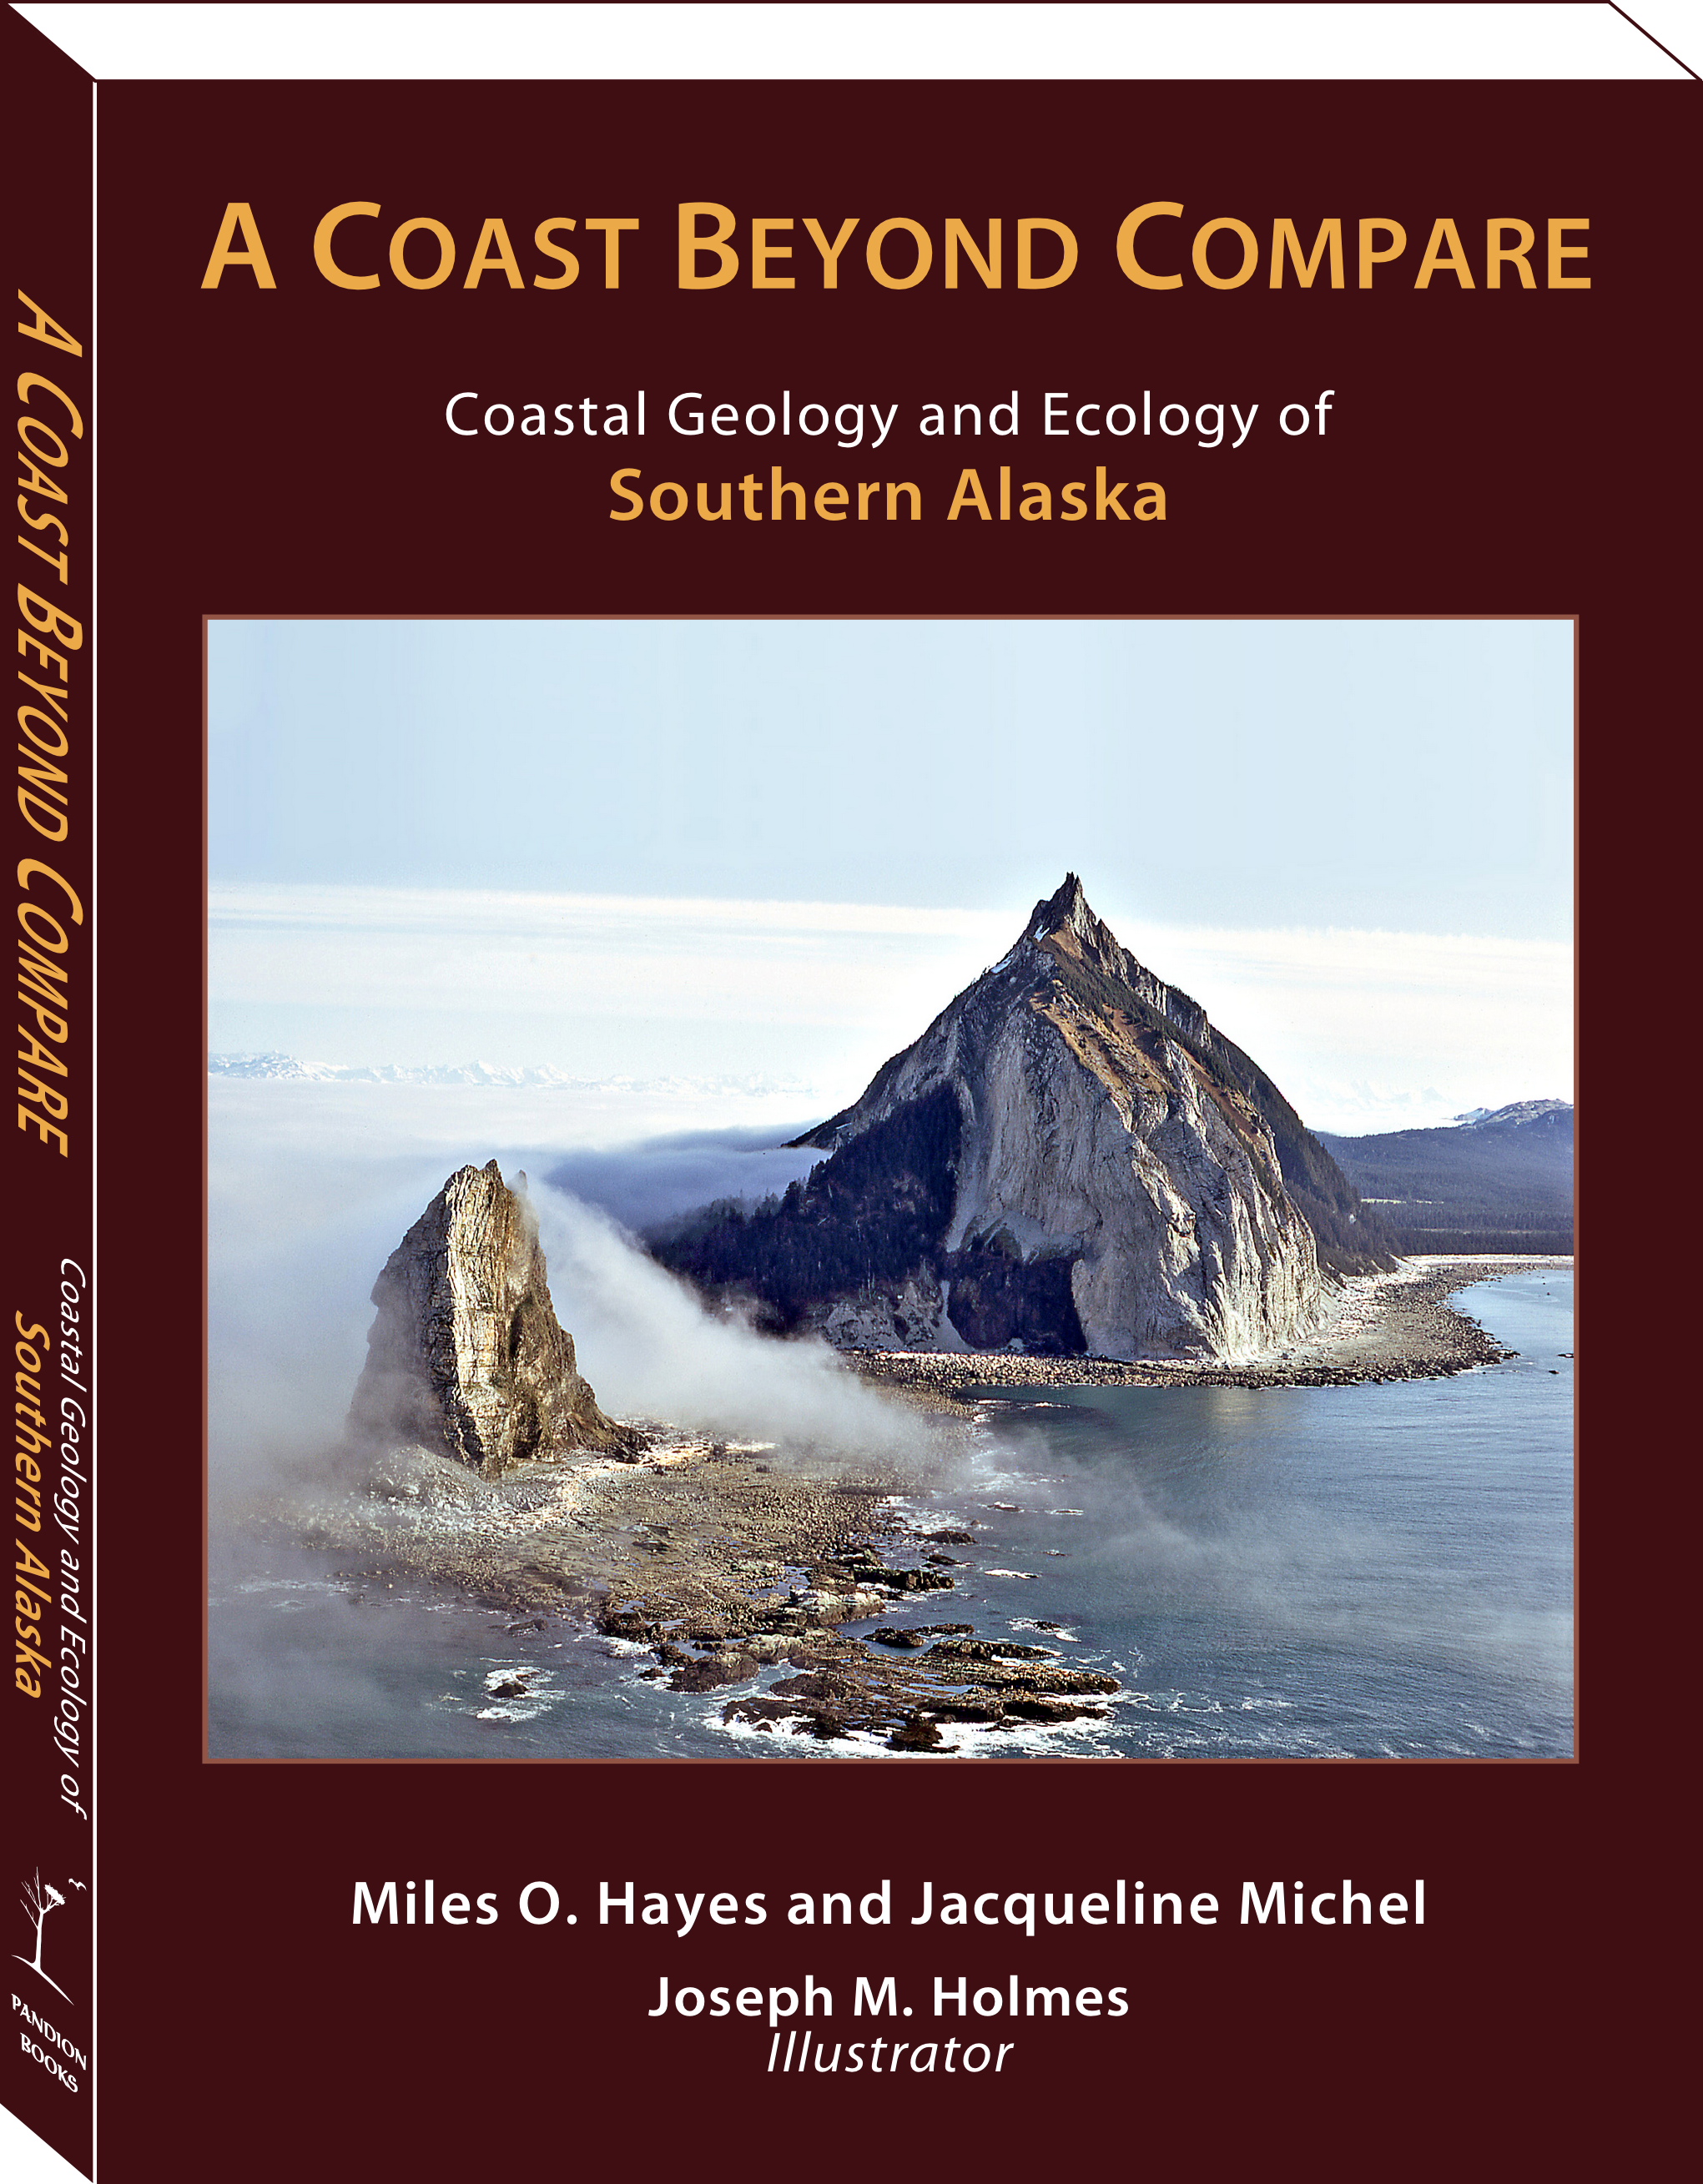 Southern AK Coast - PowerPoint Figures w/captions (download here)